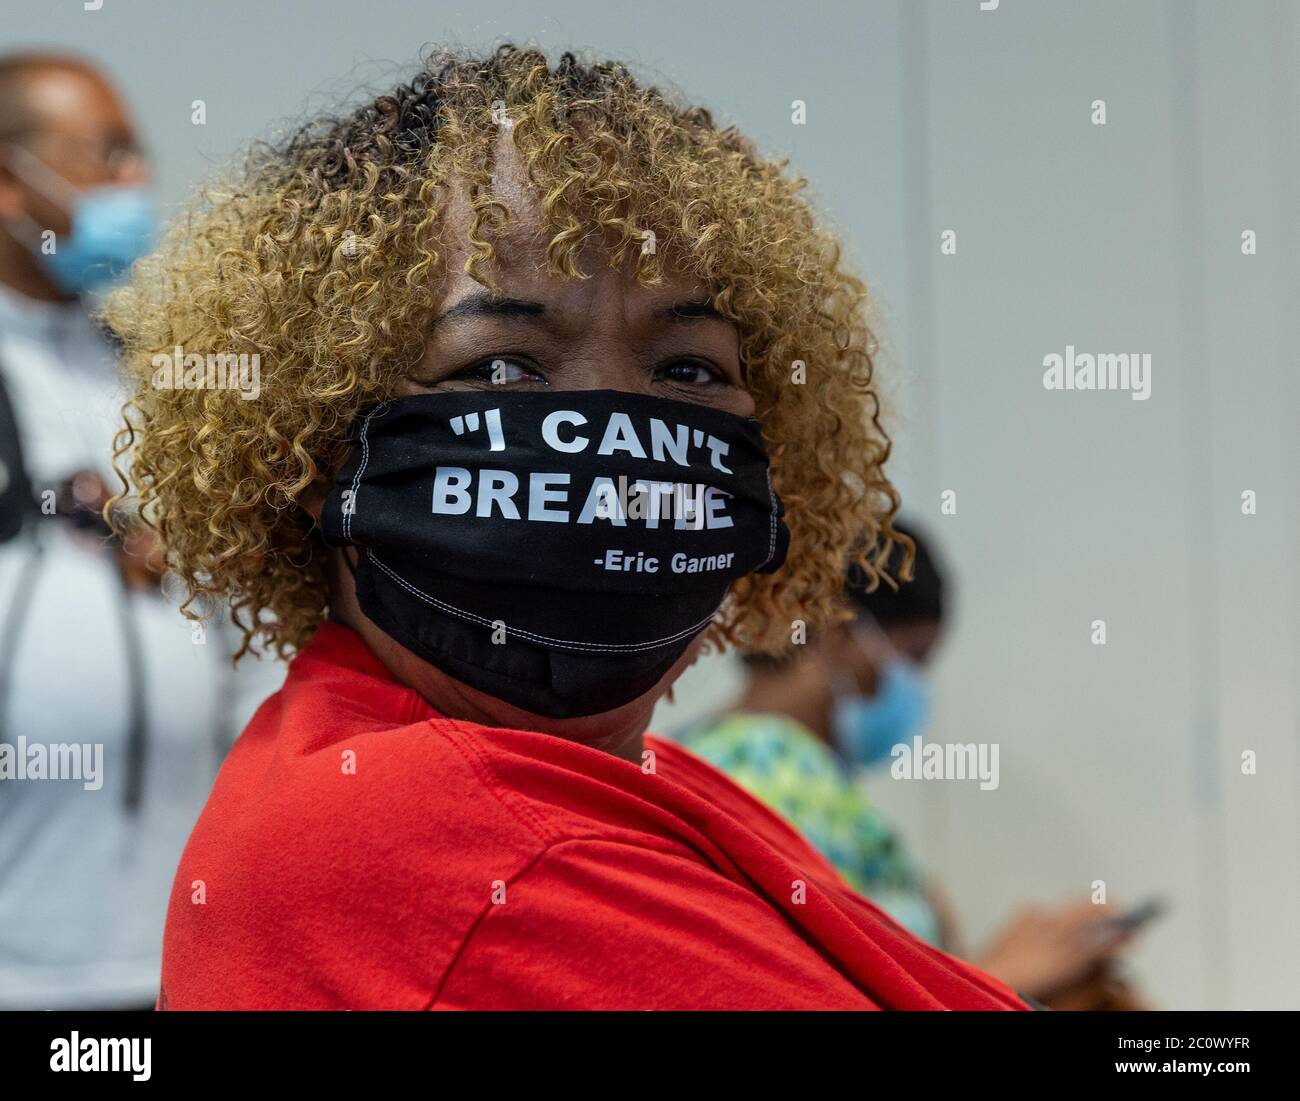 New York, United States. 12th June, 2020. Gwen Carr attends Governor Andrew Cuomo signing 'Say Their Name' police reform agenda package at office on 633 3rd Avenue (Photo by Lev Radin/Pacific Press) Credit: Pacific Press Agency/Alamy Live News Stock Photo